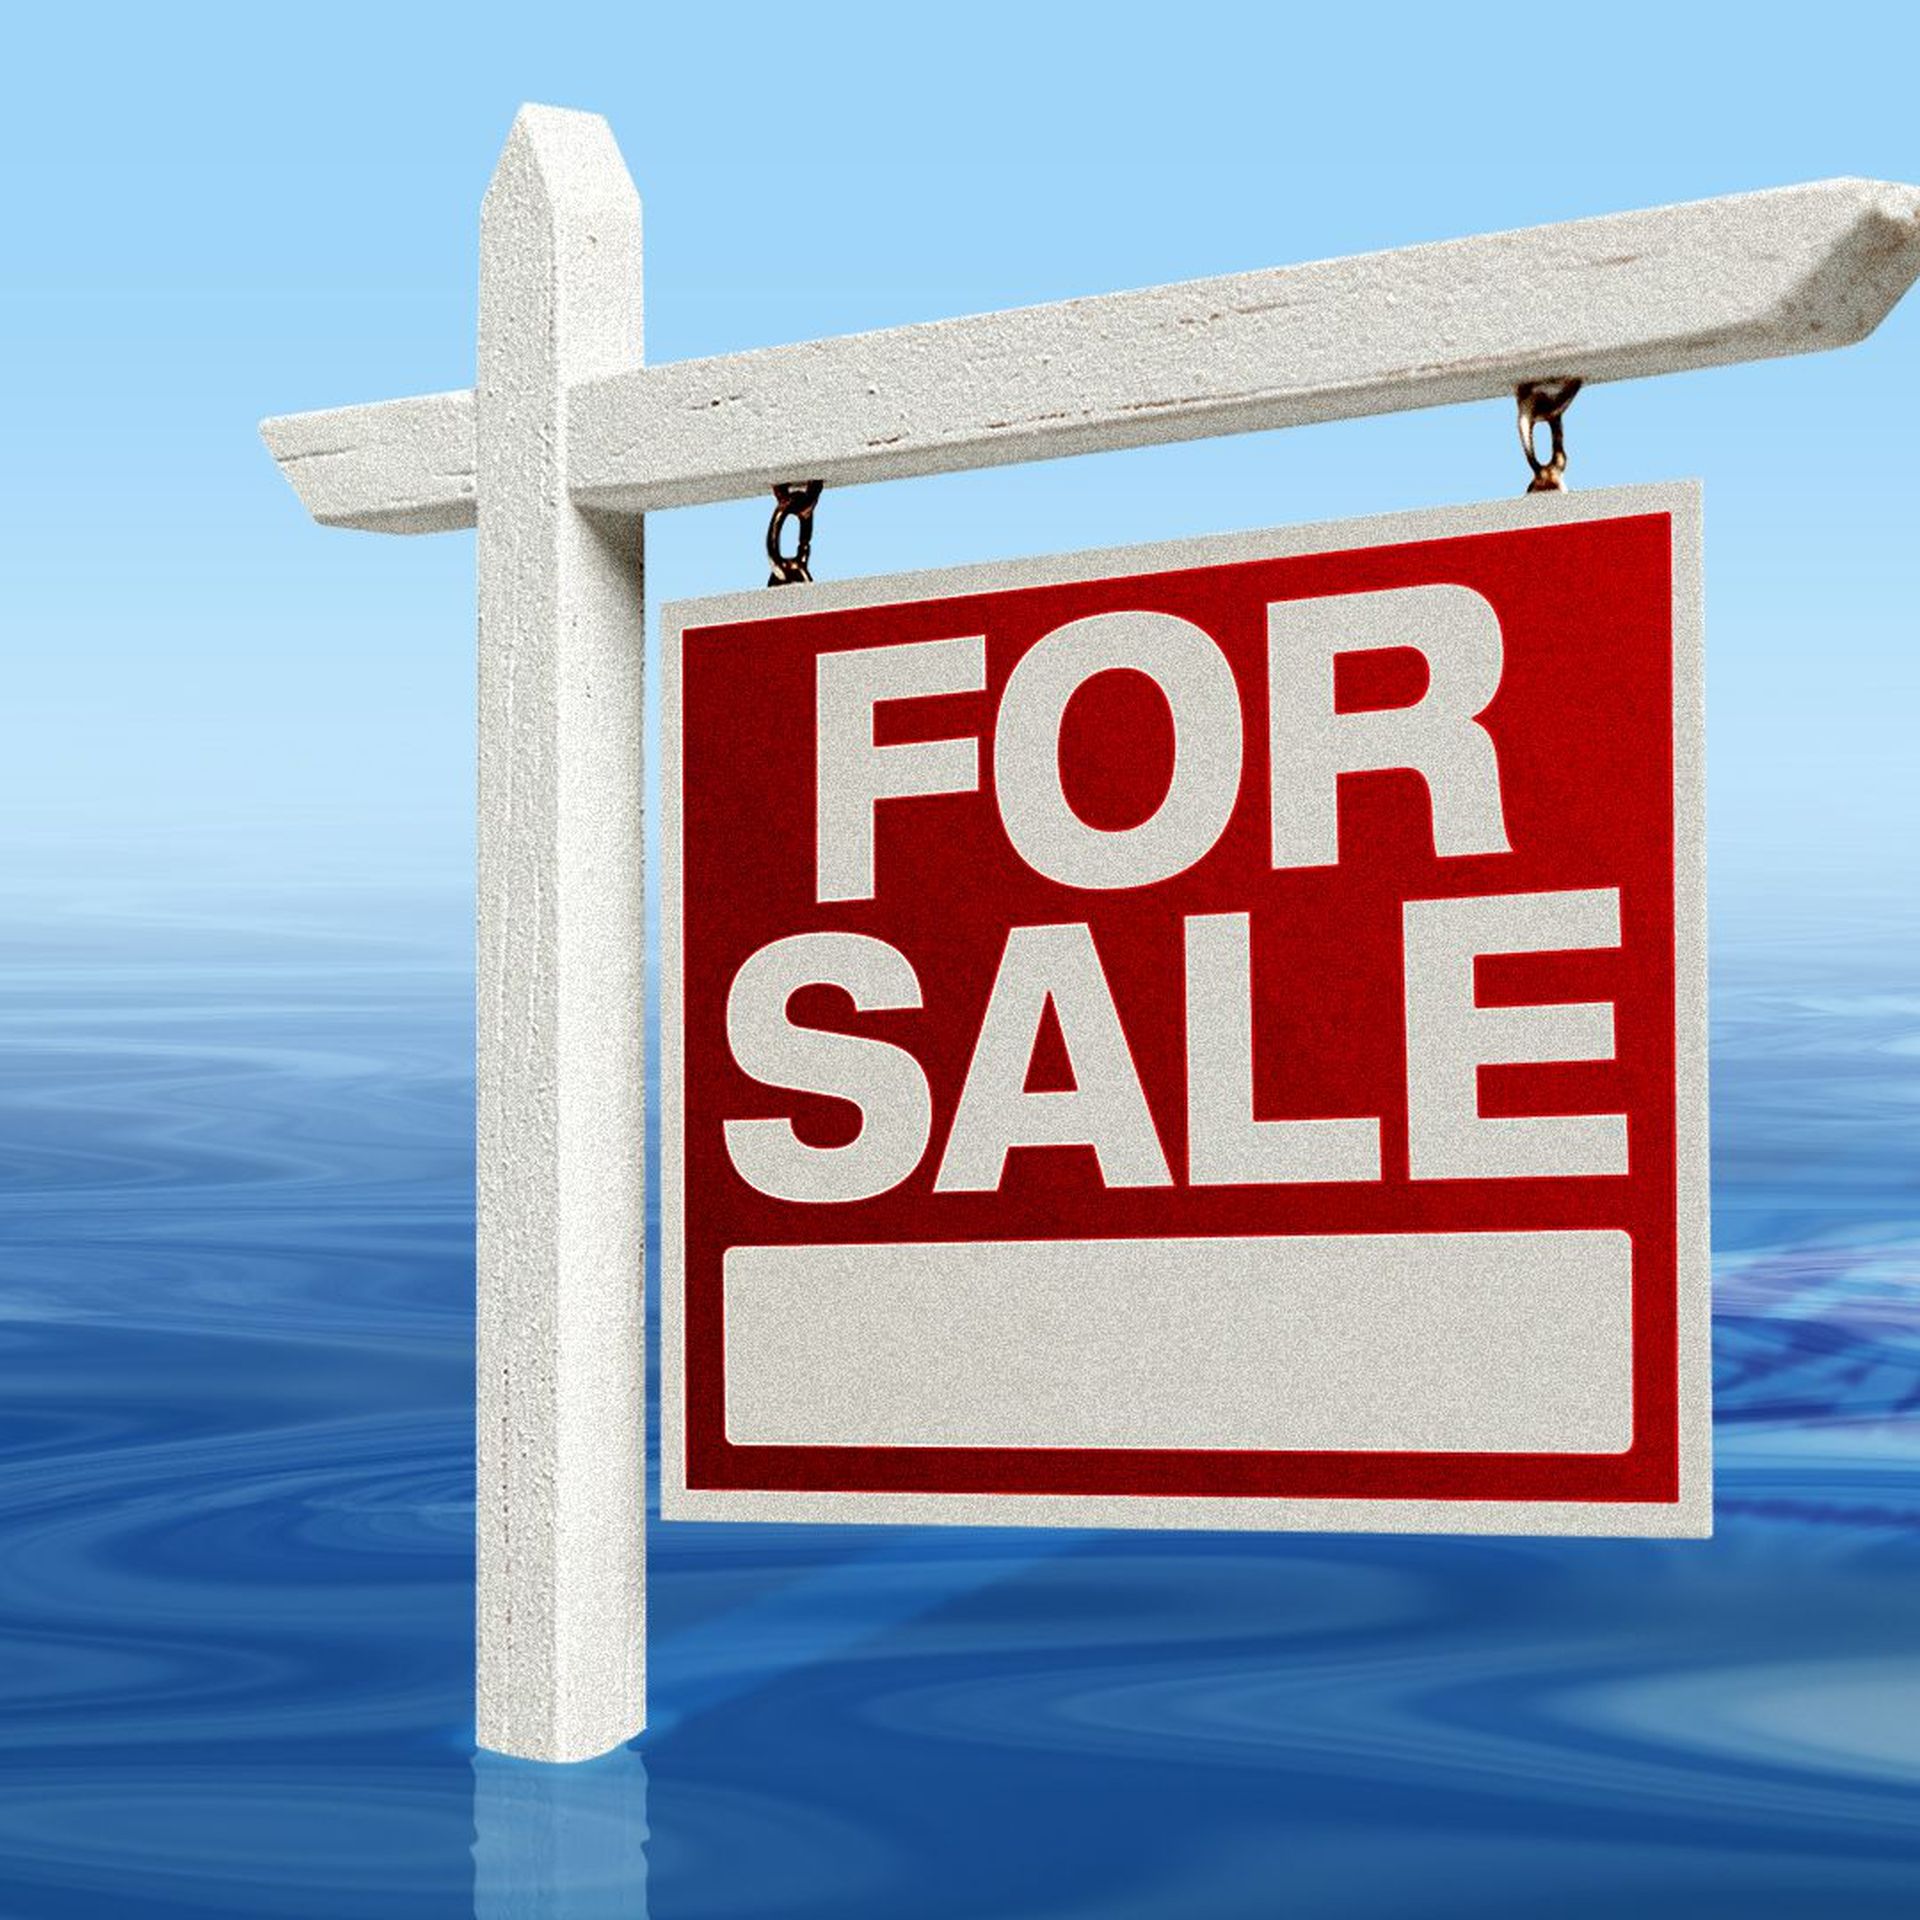 Illustration for a for sale sign in the middle of a body of water